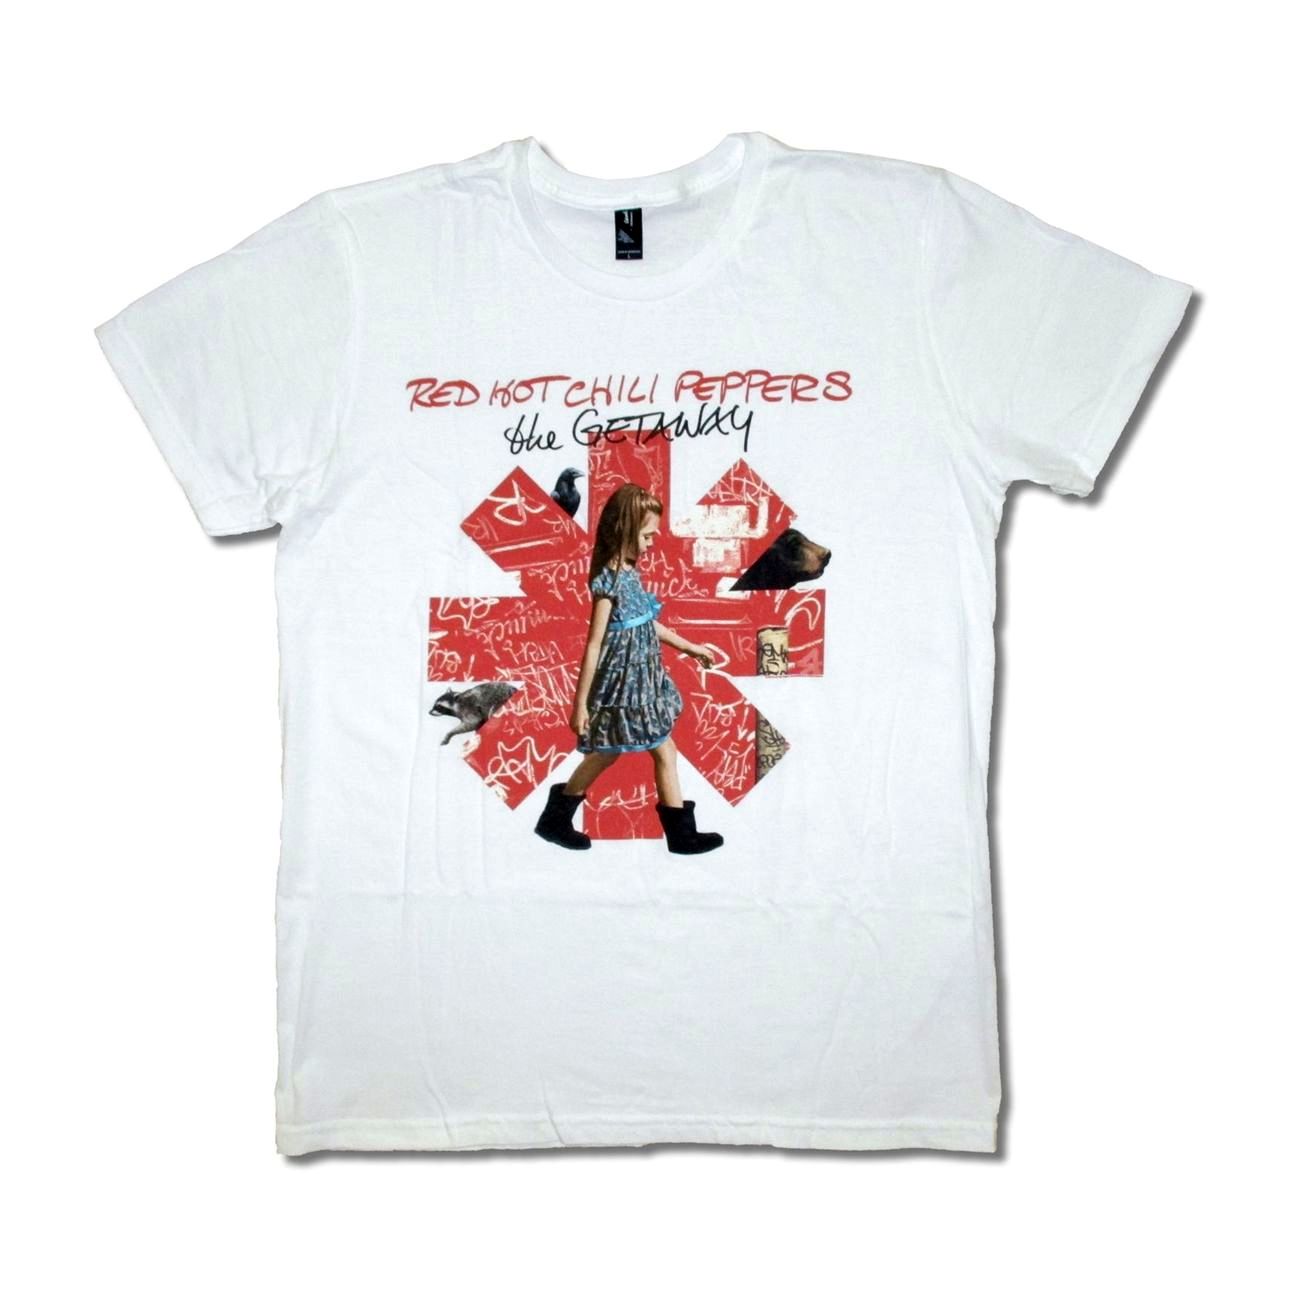 SALE／65%OFF】 Band Tee Tシャツ レッチリ レッドホット 